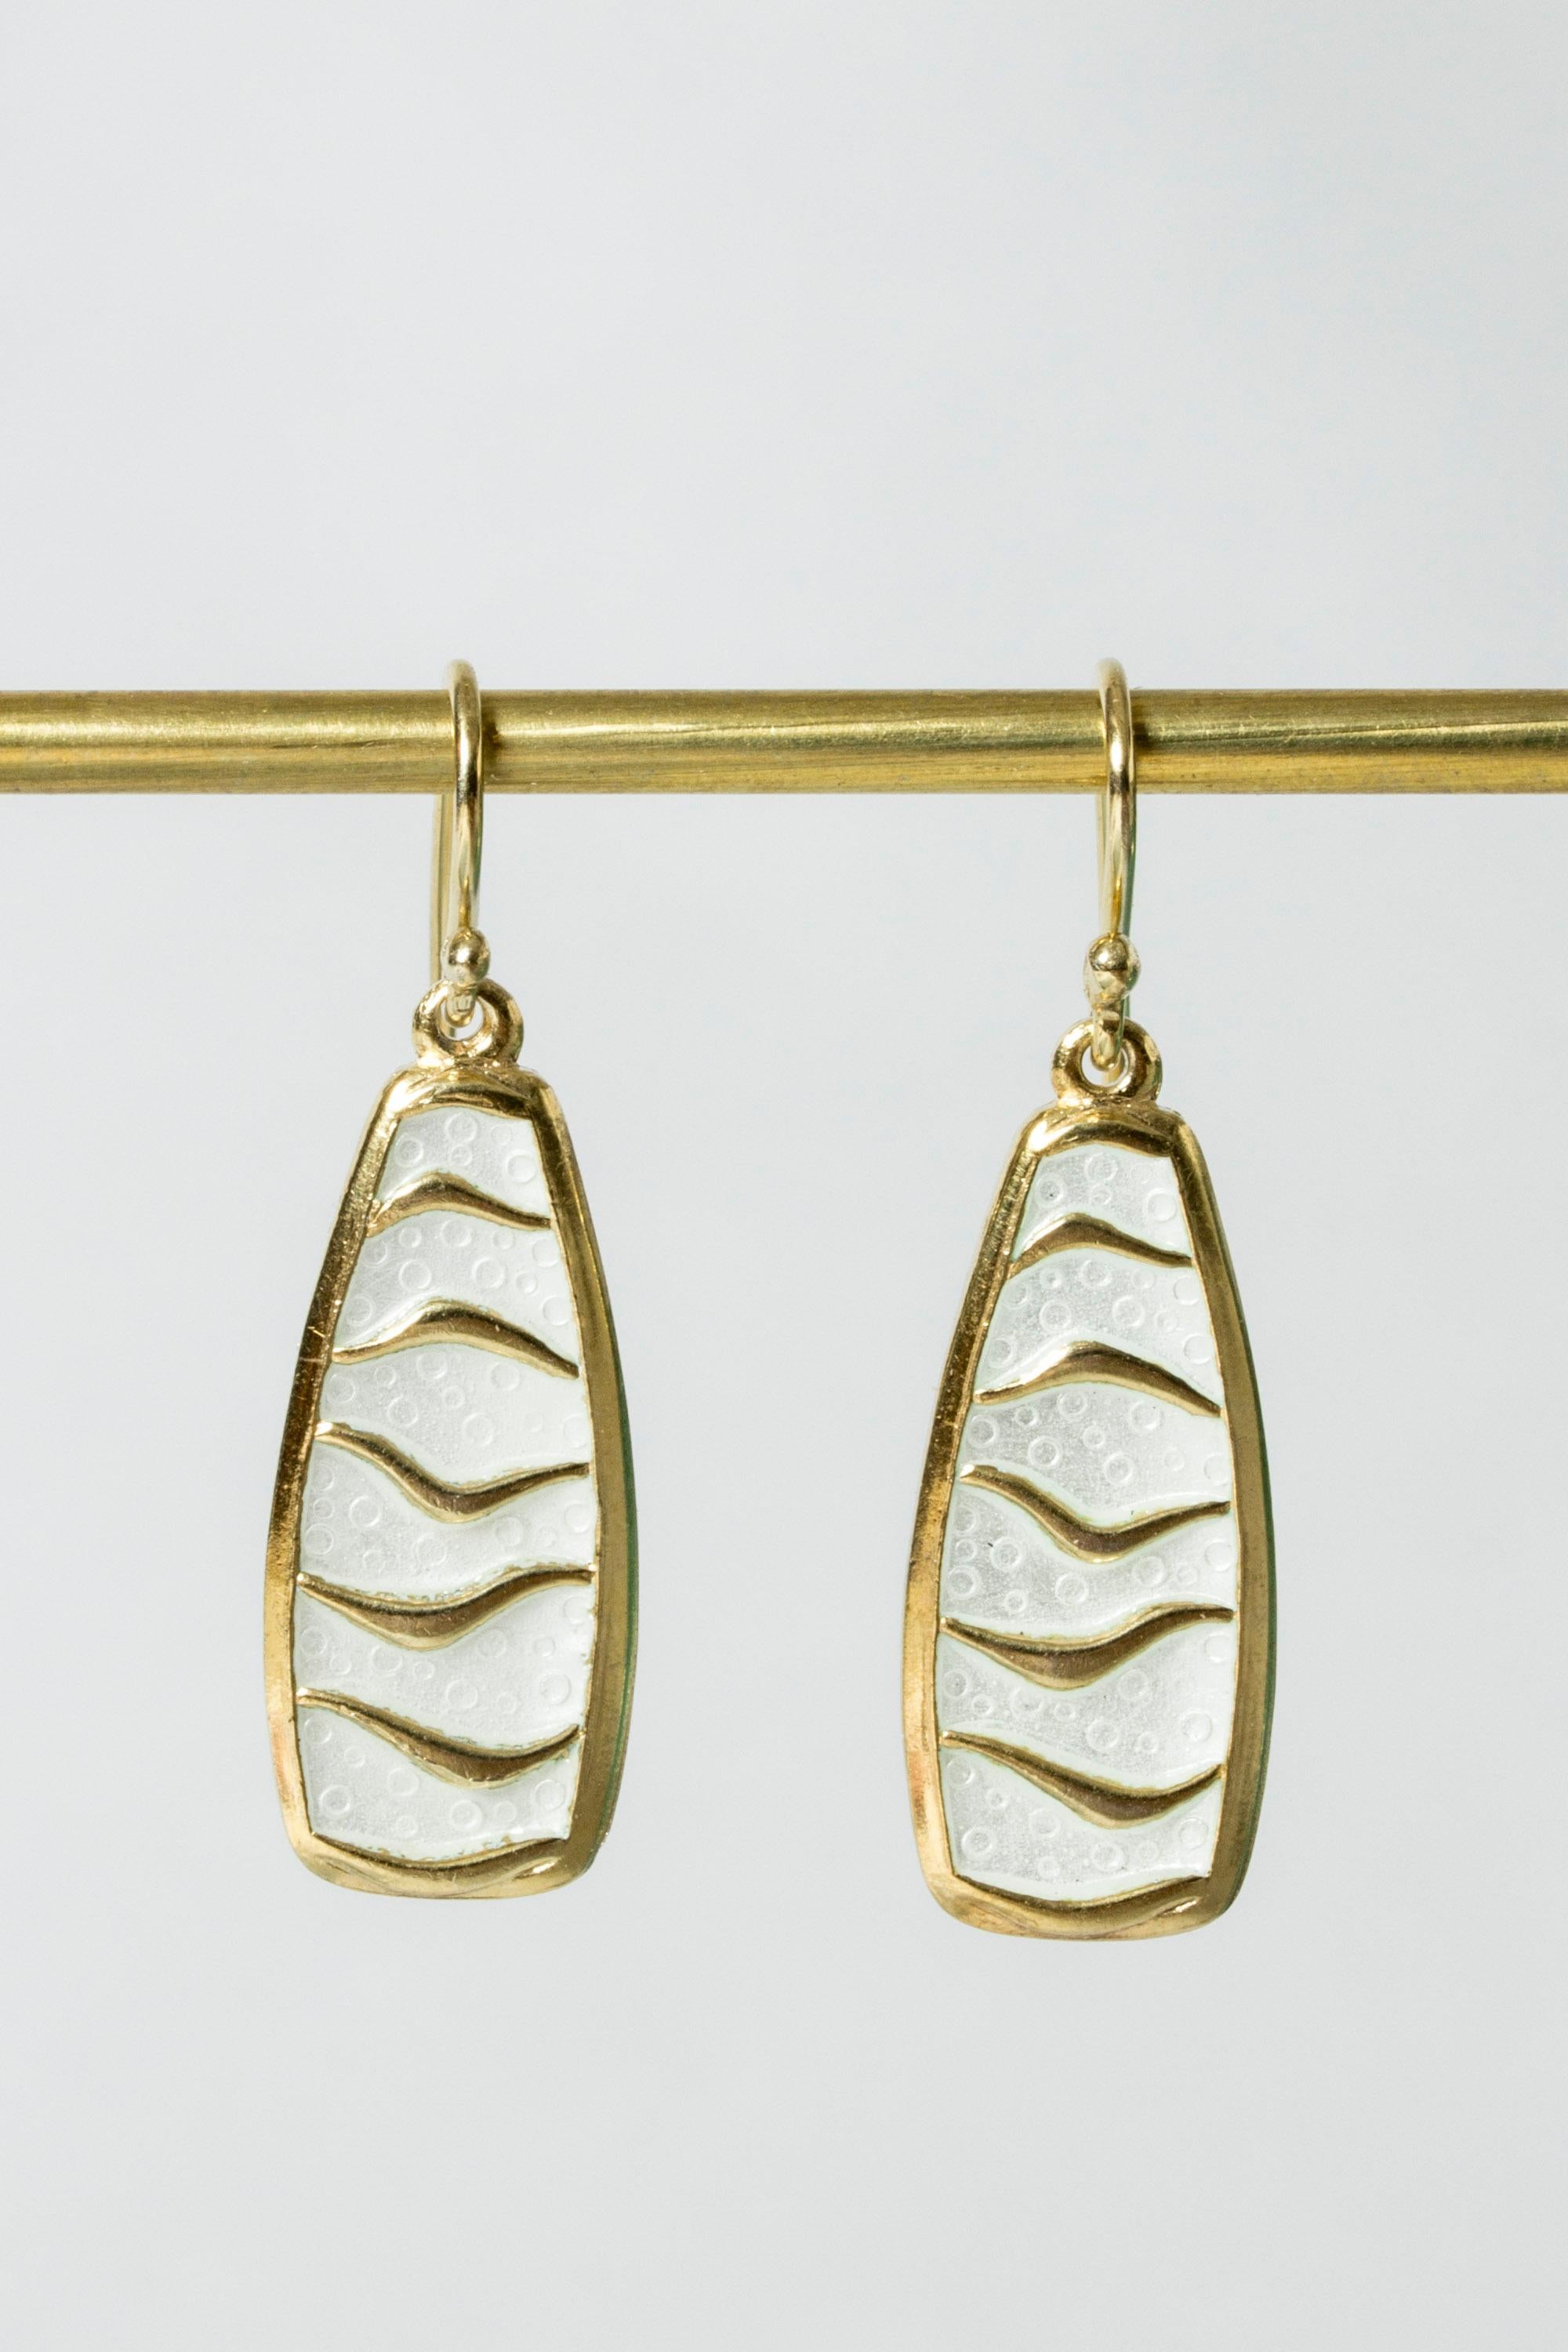 Pair of cool silver earrings from David Andersen. The silver is gilded, which makes an elegant contrast with the white enamel. Graphic pattern, subtle bubbles in the enamel.